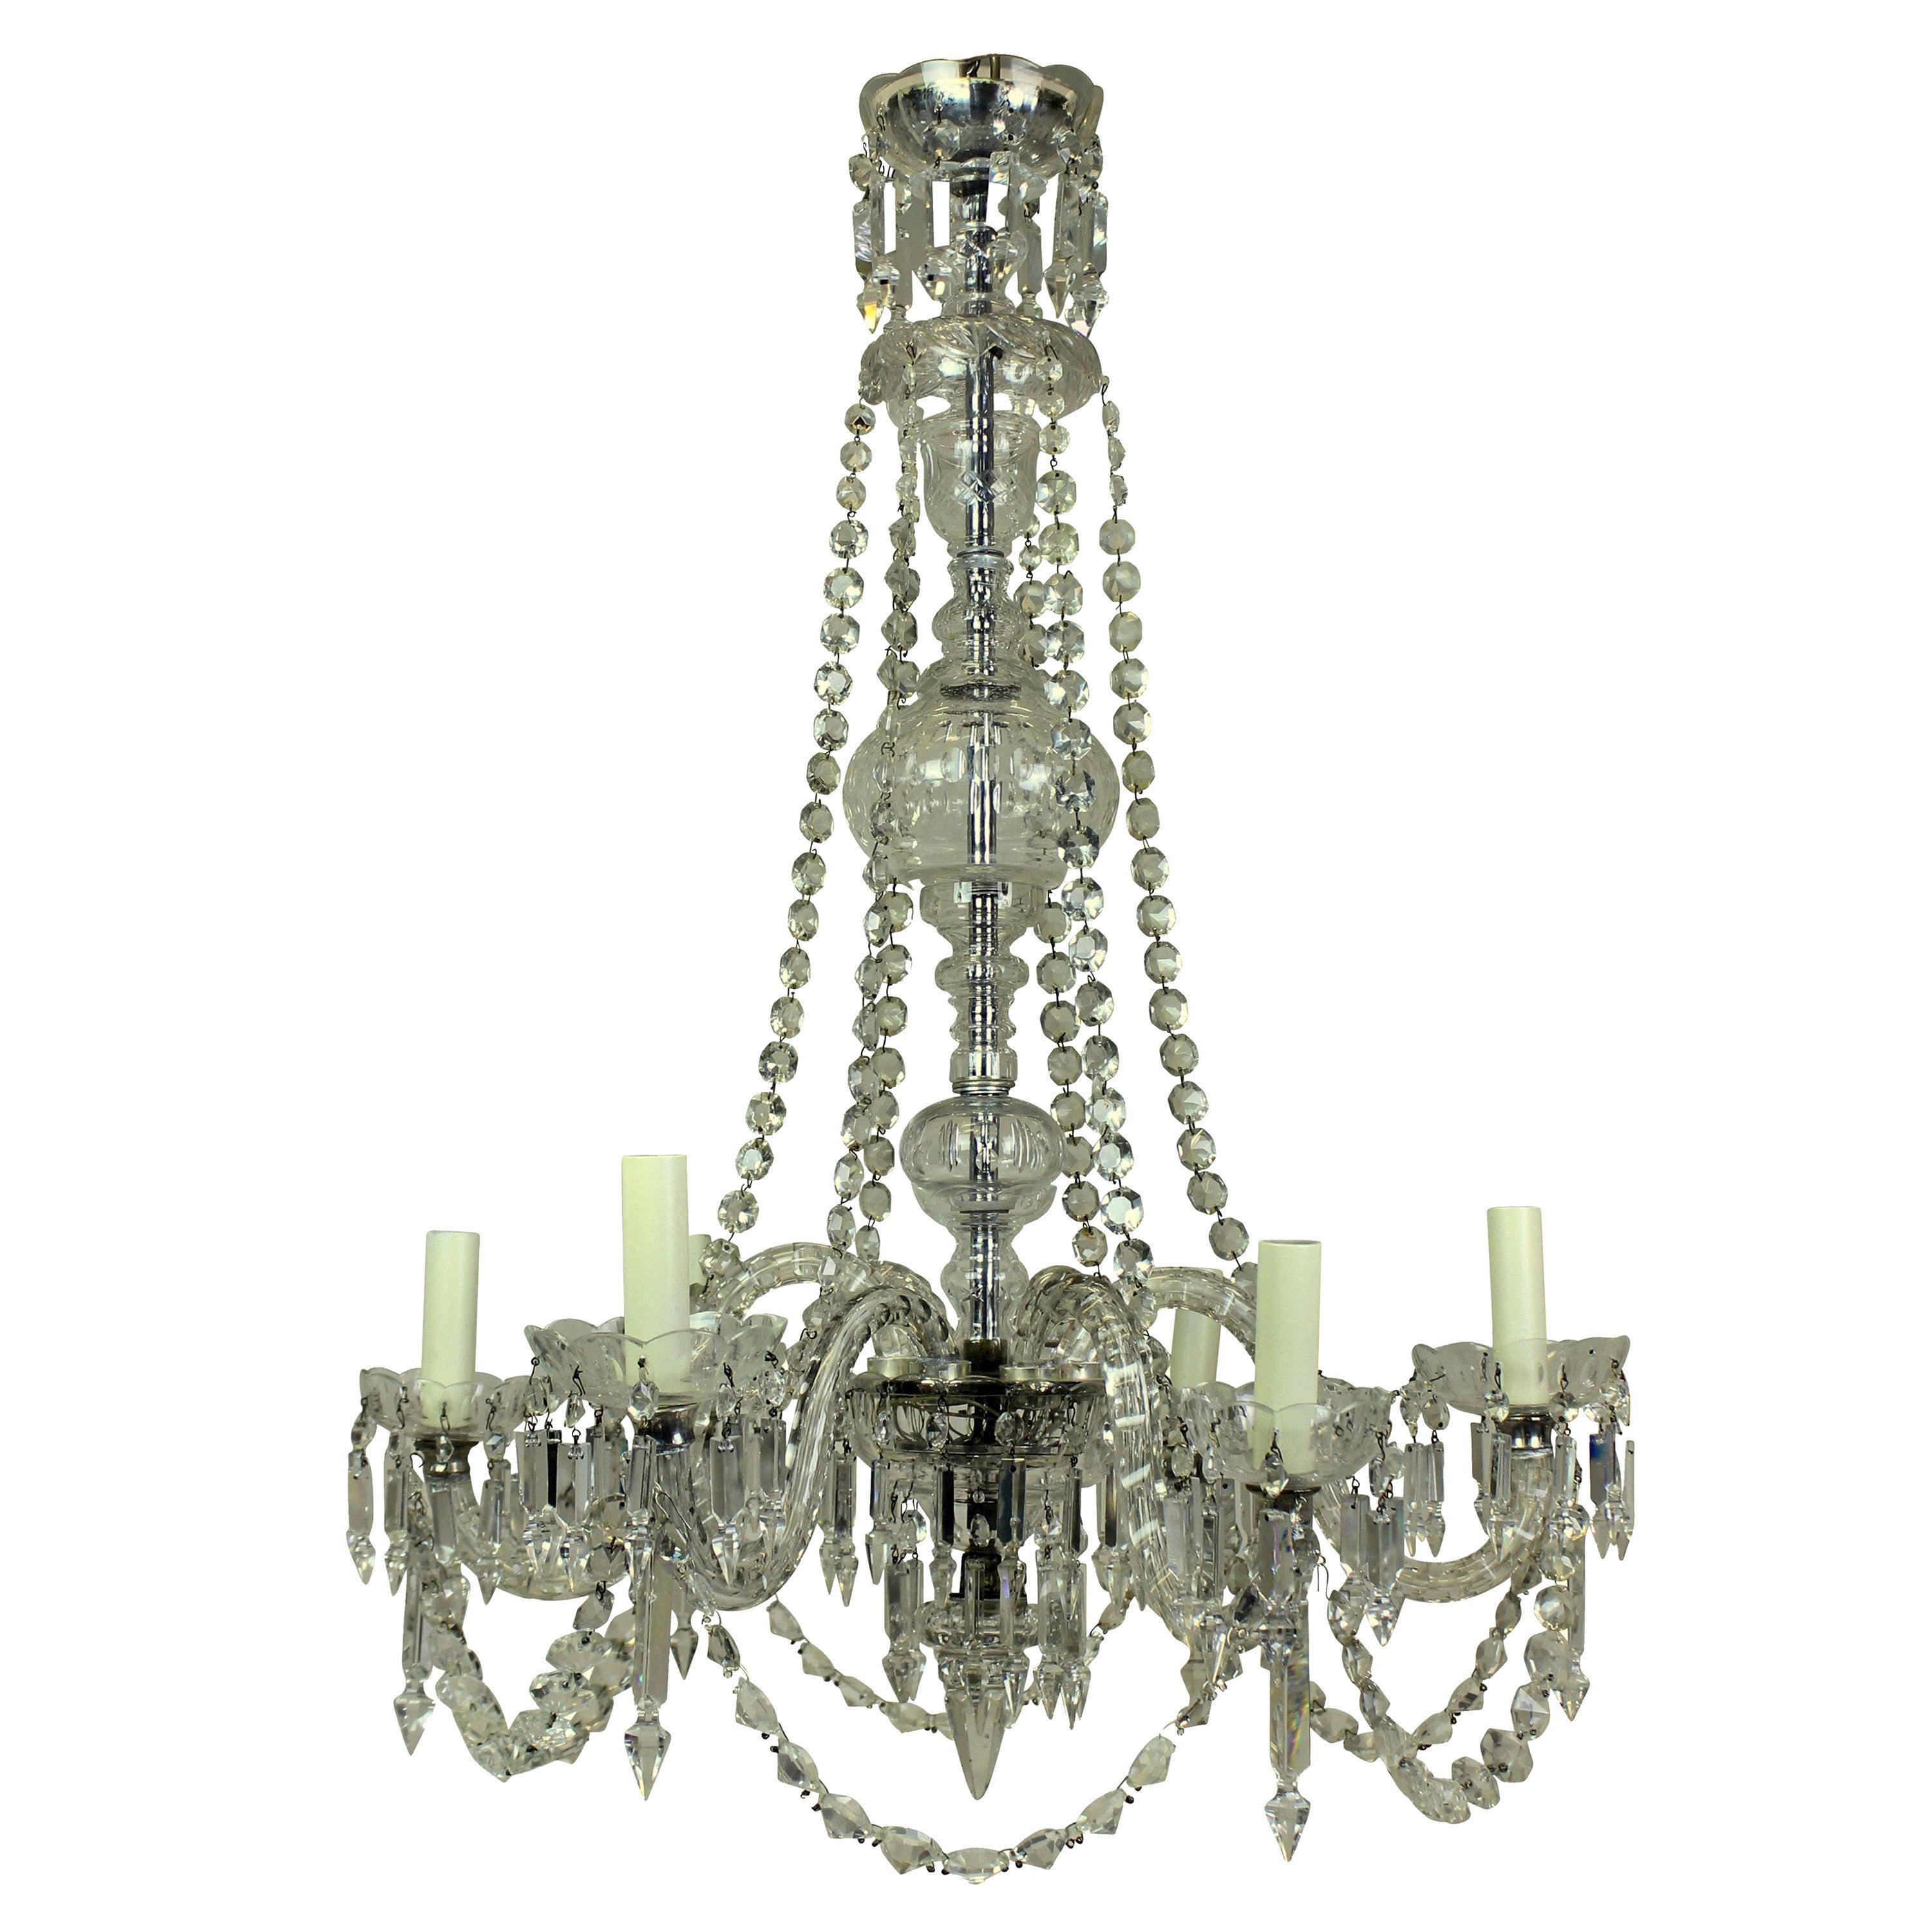 Late Victorian English Cut-Glass Chandelier